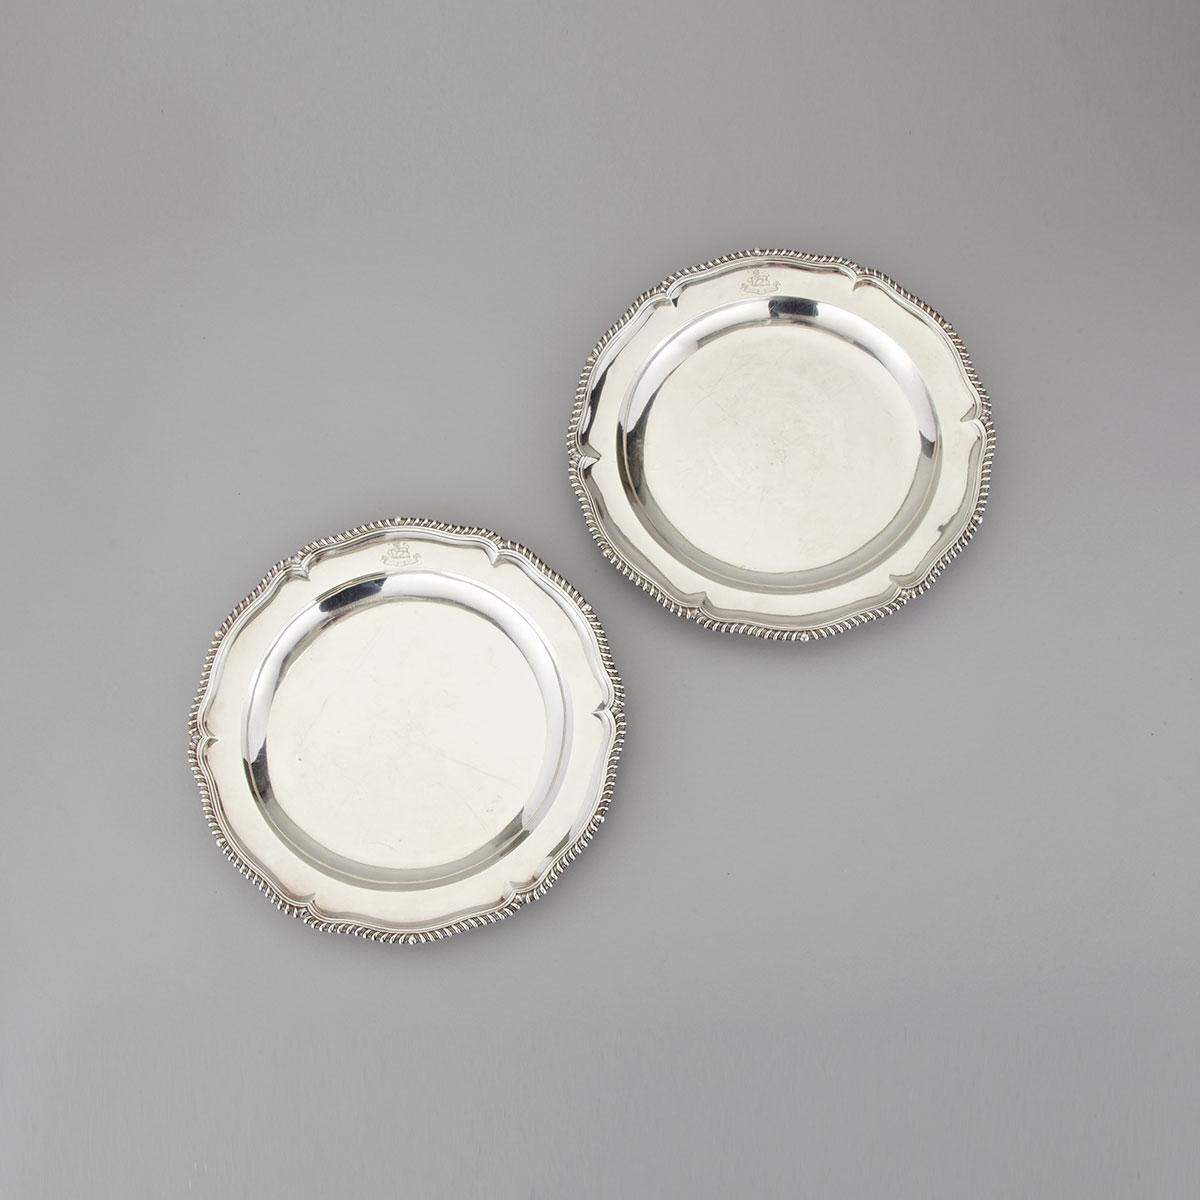 Pair of William IV Silver Second Course Dishes, Mary Sibley & Richard Sibley II, London, 1836